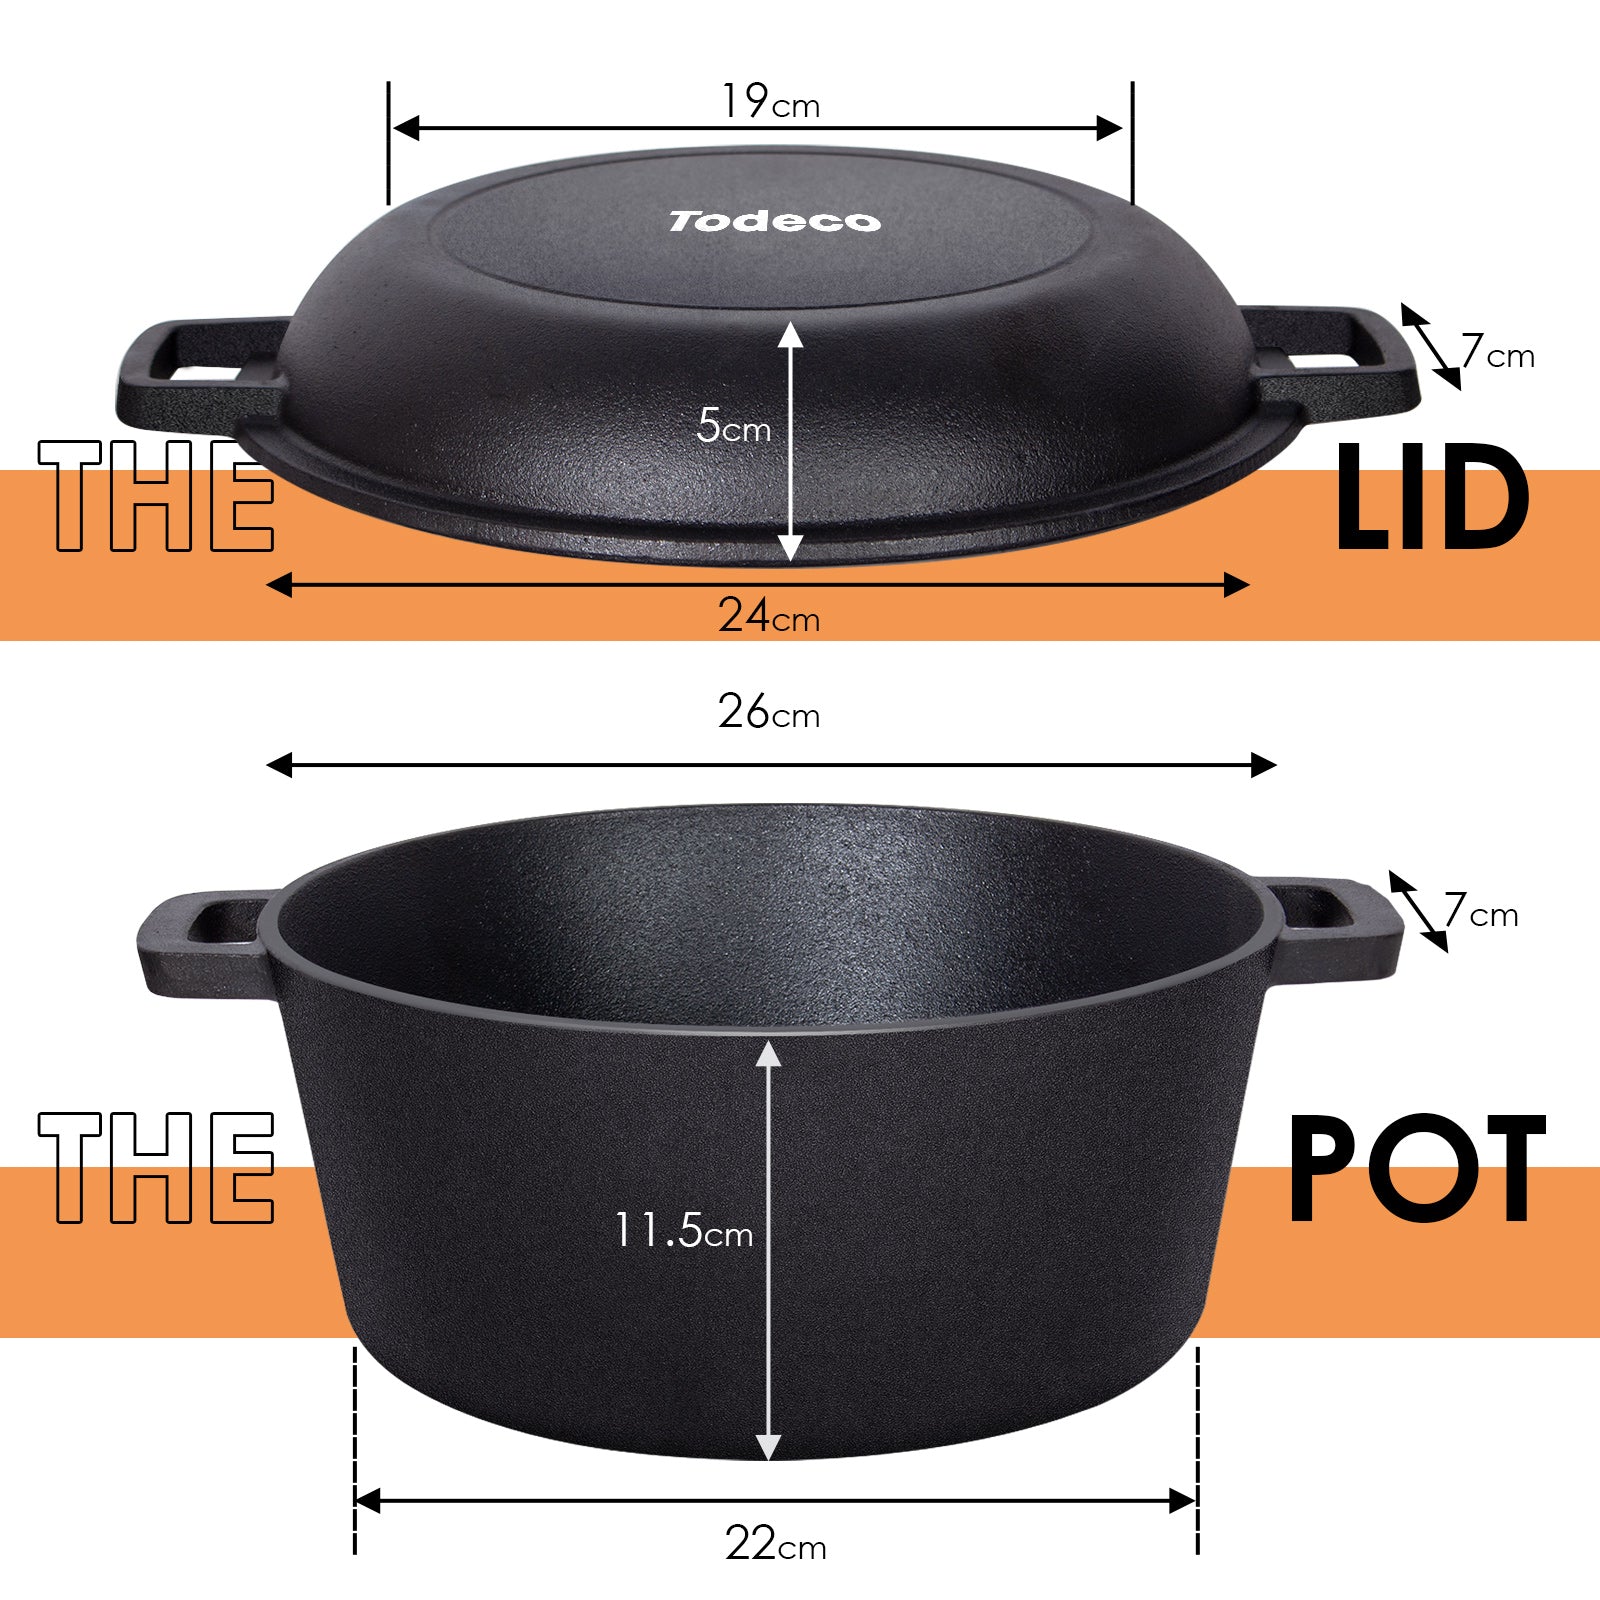 2-in-1-Cast-Iron-Pot-with-Pan-Lid-5L-Dual-Function-Cast-Iron-Saucepan-Frying-Pan-Pre-Seasoned-Dutch-Oven-with-Recipe-for-Cooking-Camping-BBQ-Roasting-or-Braising-2-in-1-Cast-Iron-Pot-with-Pan-Lid